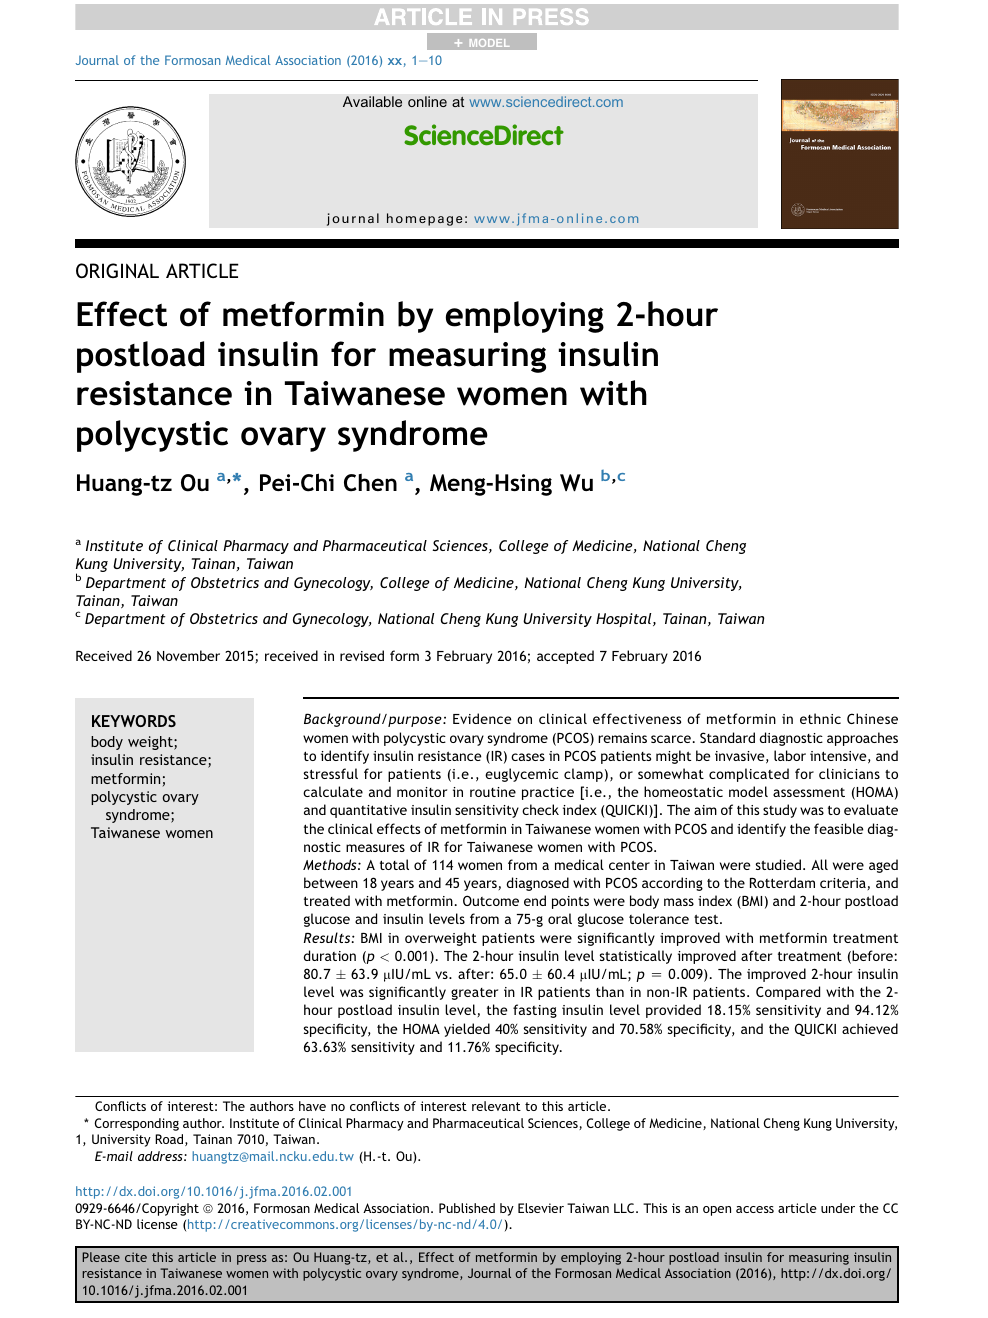 Effect Of Metformin By Employing 2 Hour Postload Insulin For Measuring Insulin Resistance In Taiwanese Women With Polycystic Ovary Syndrome Topic Of Research Paper In Clinical Medicine Download Scholarly Article Pdf And